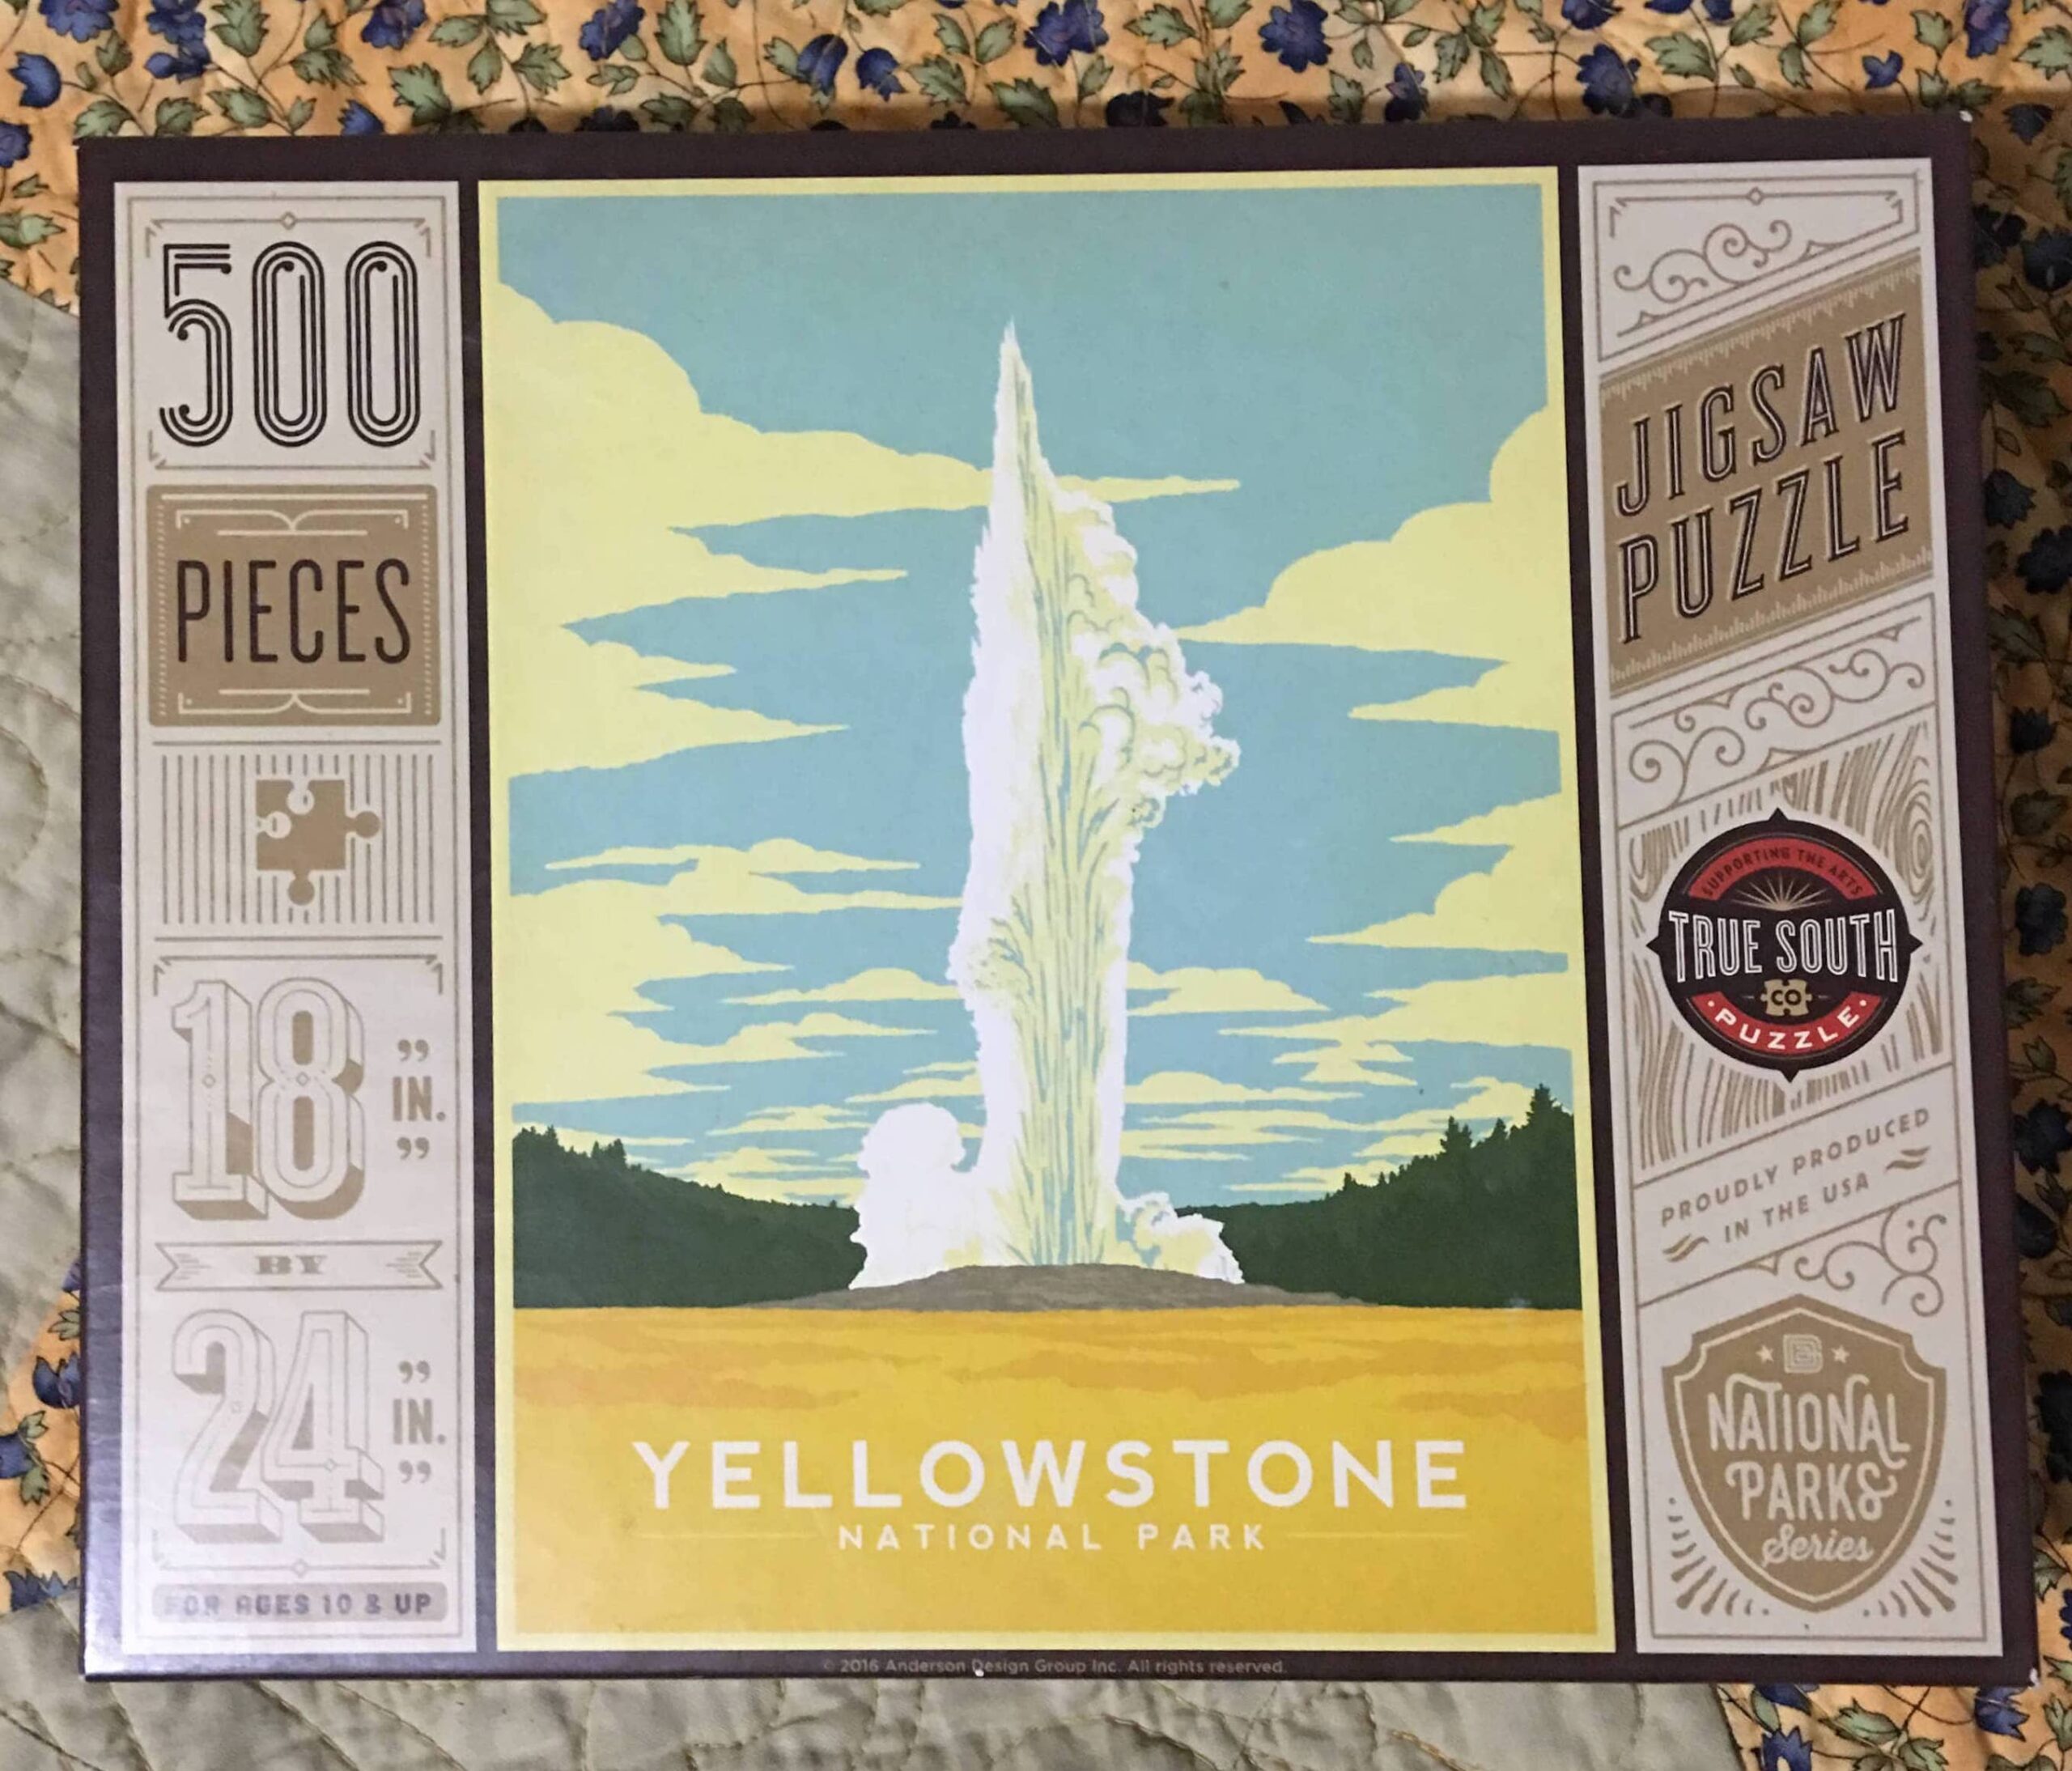 Yellowstone National Park 500 Piece Puzzle